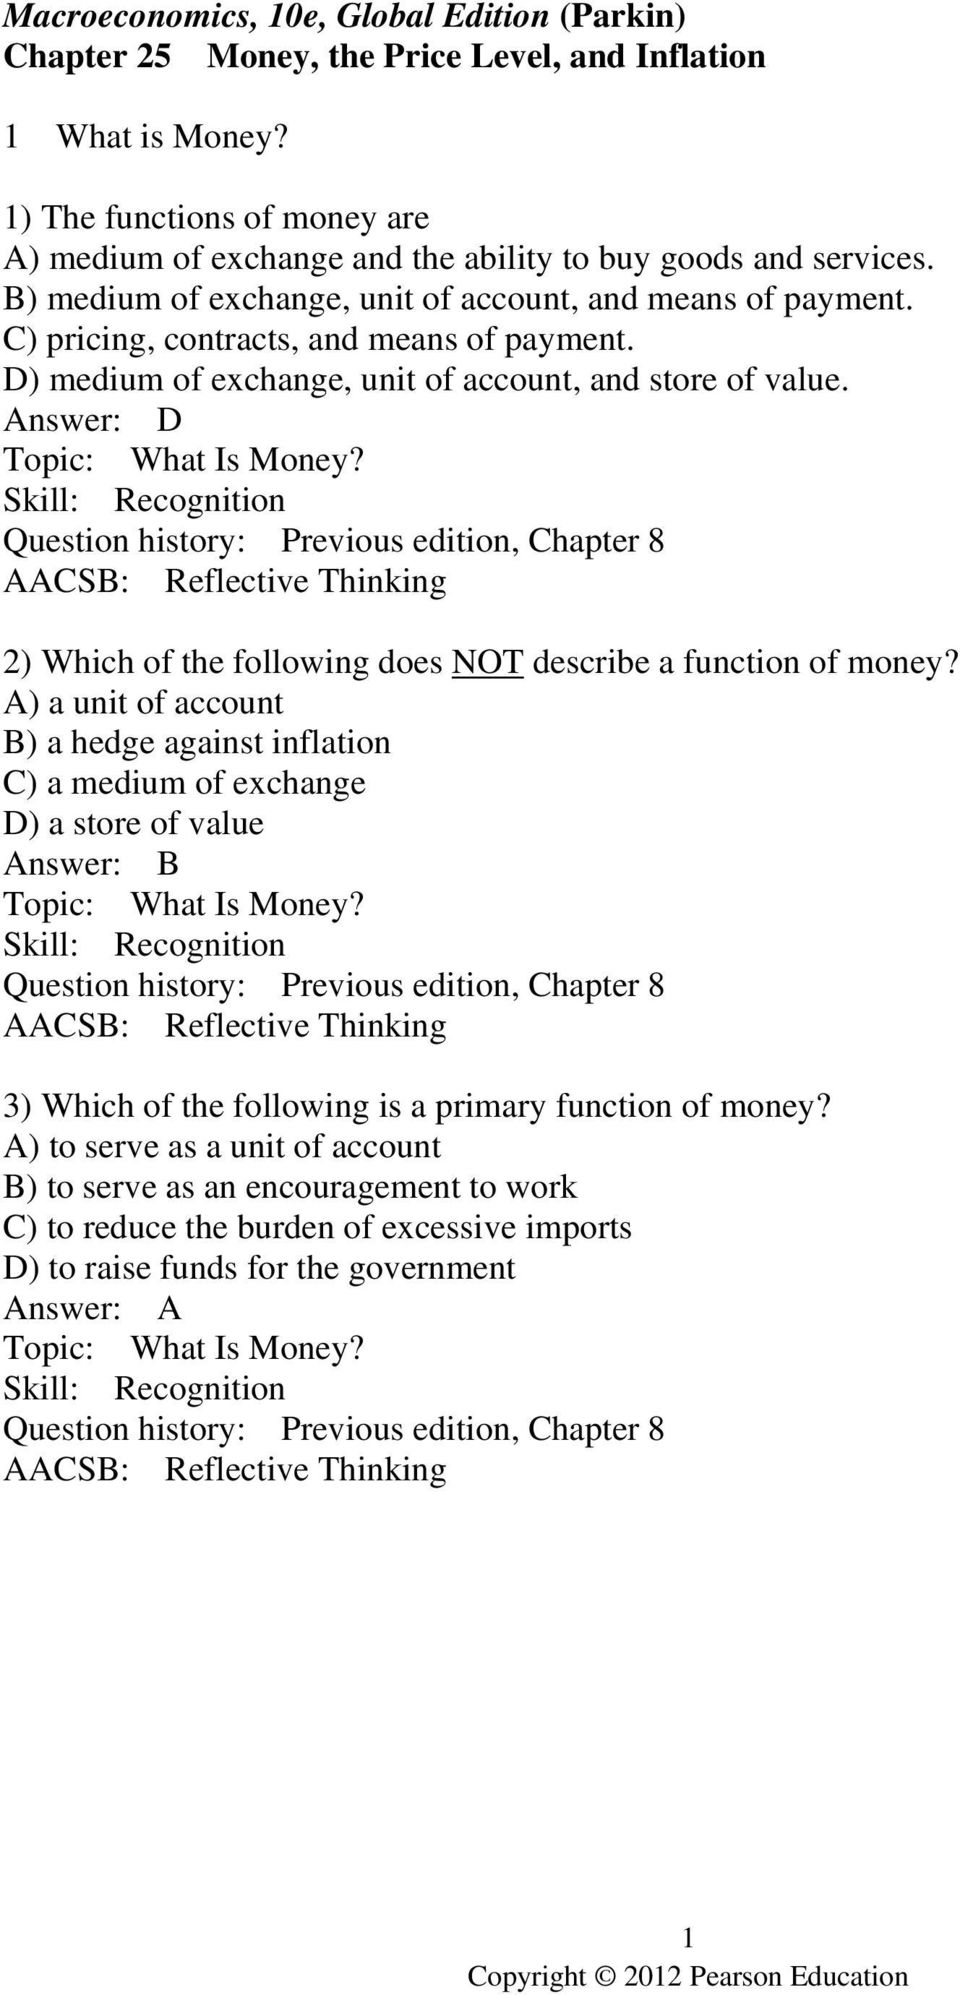 C) pricing, contracts, and means of payment. D) medium of exchange, unit of account, and store of value. Topic: What Is Money? 2) Which of the following does NOT describe a function of money?